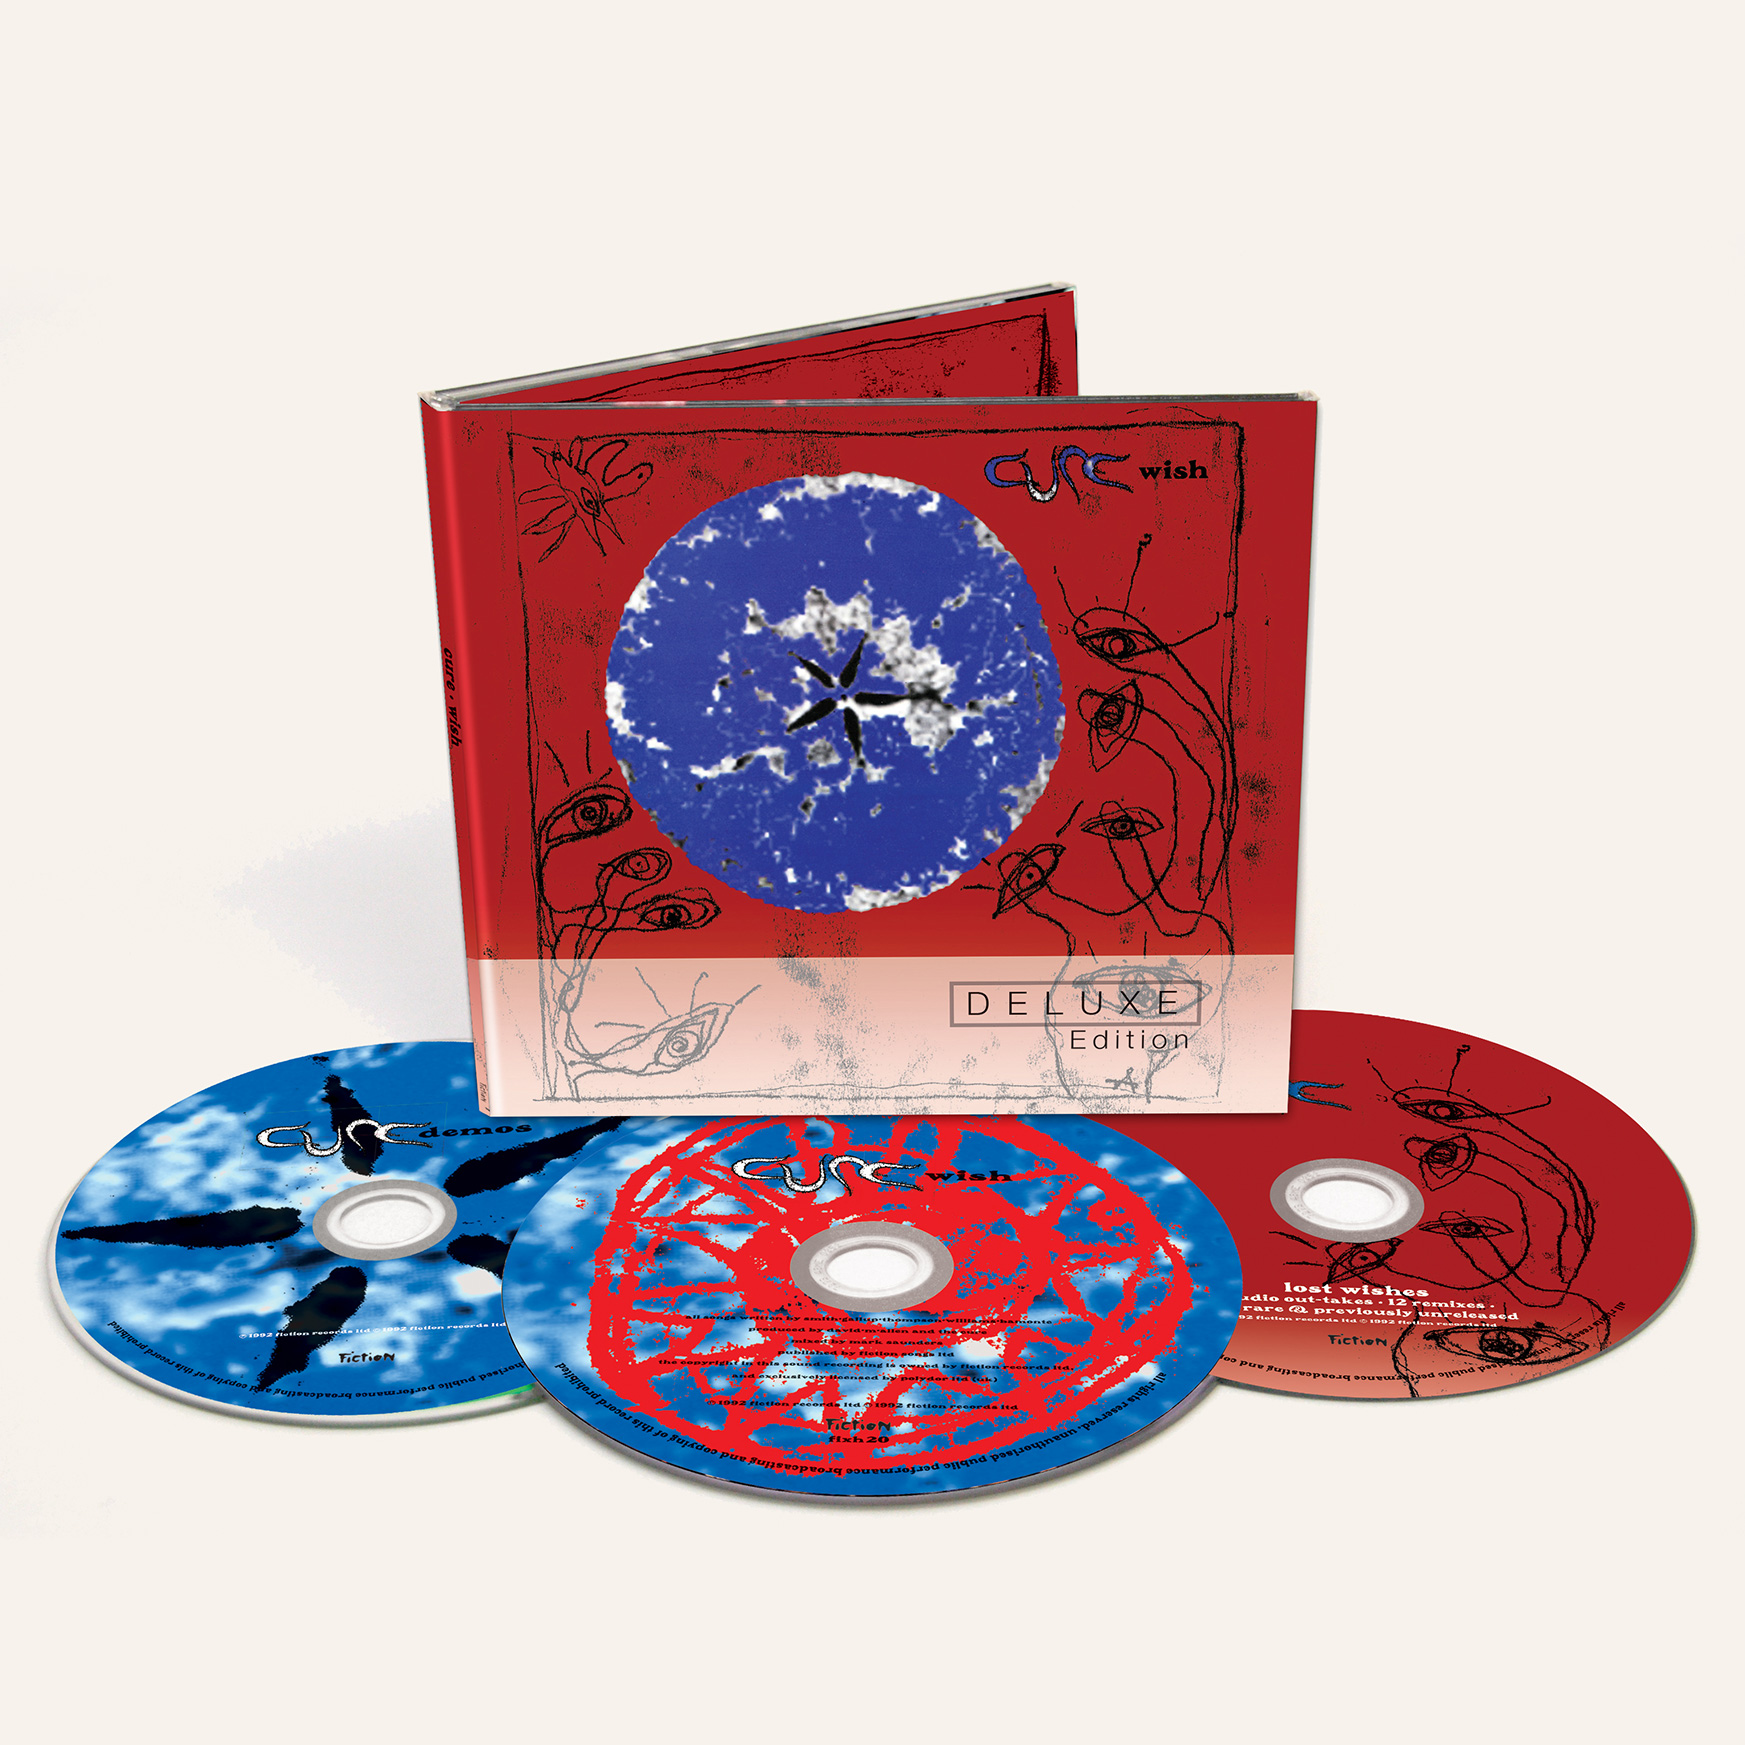 the-cure-wish-deluxe-edition-3d-pack-shot23.jpg